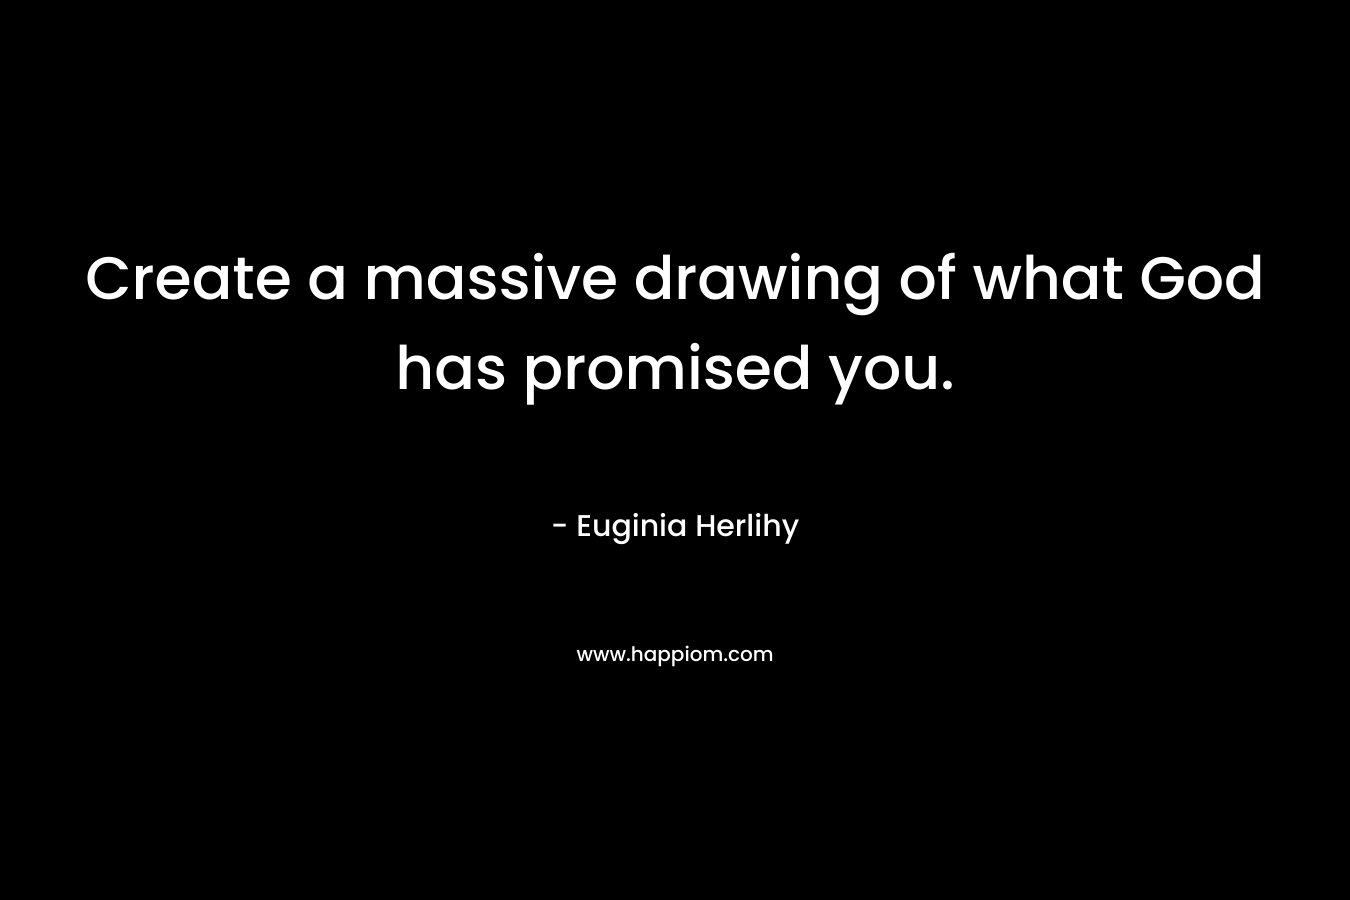 Create a massive drawing of what God has promised you.